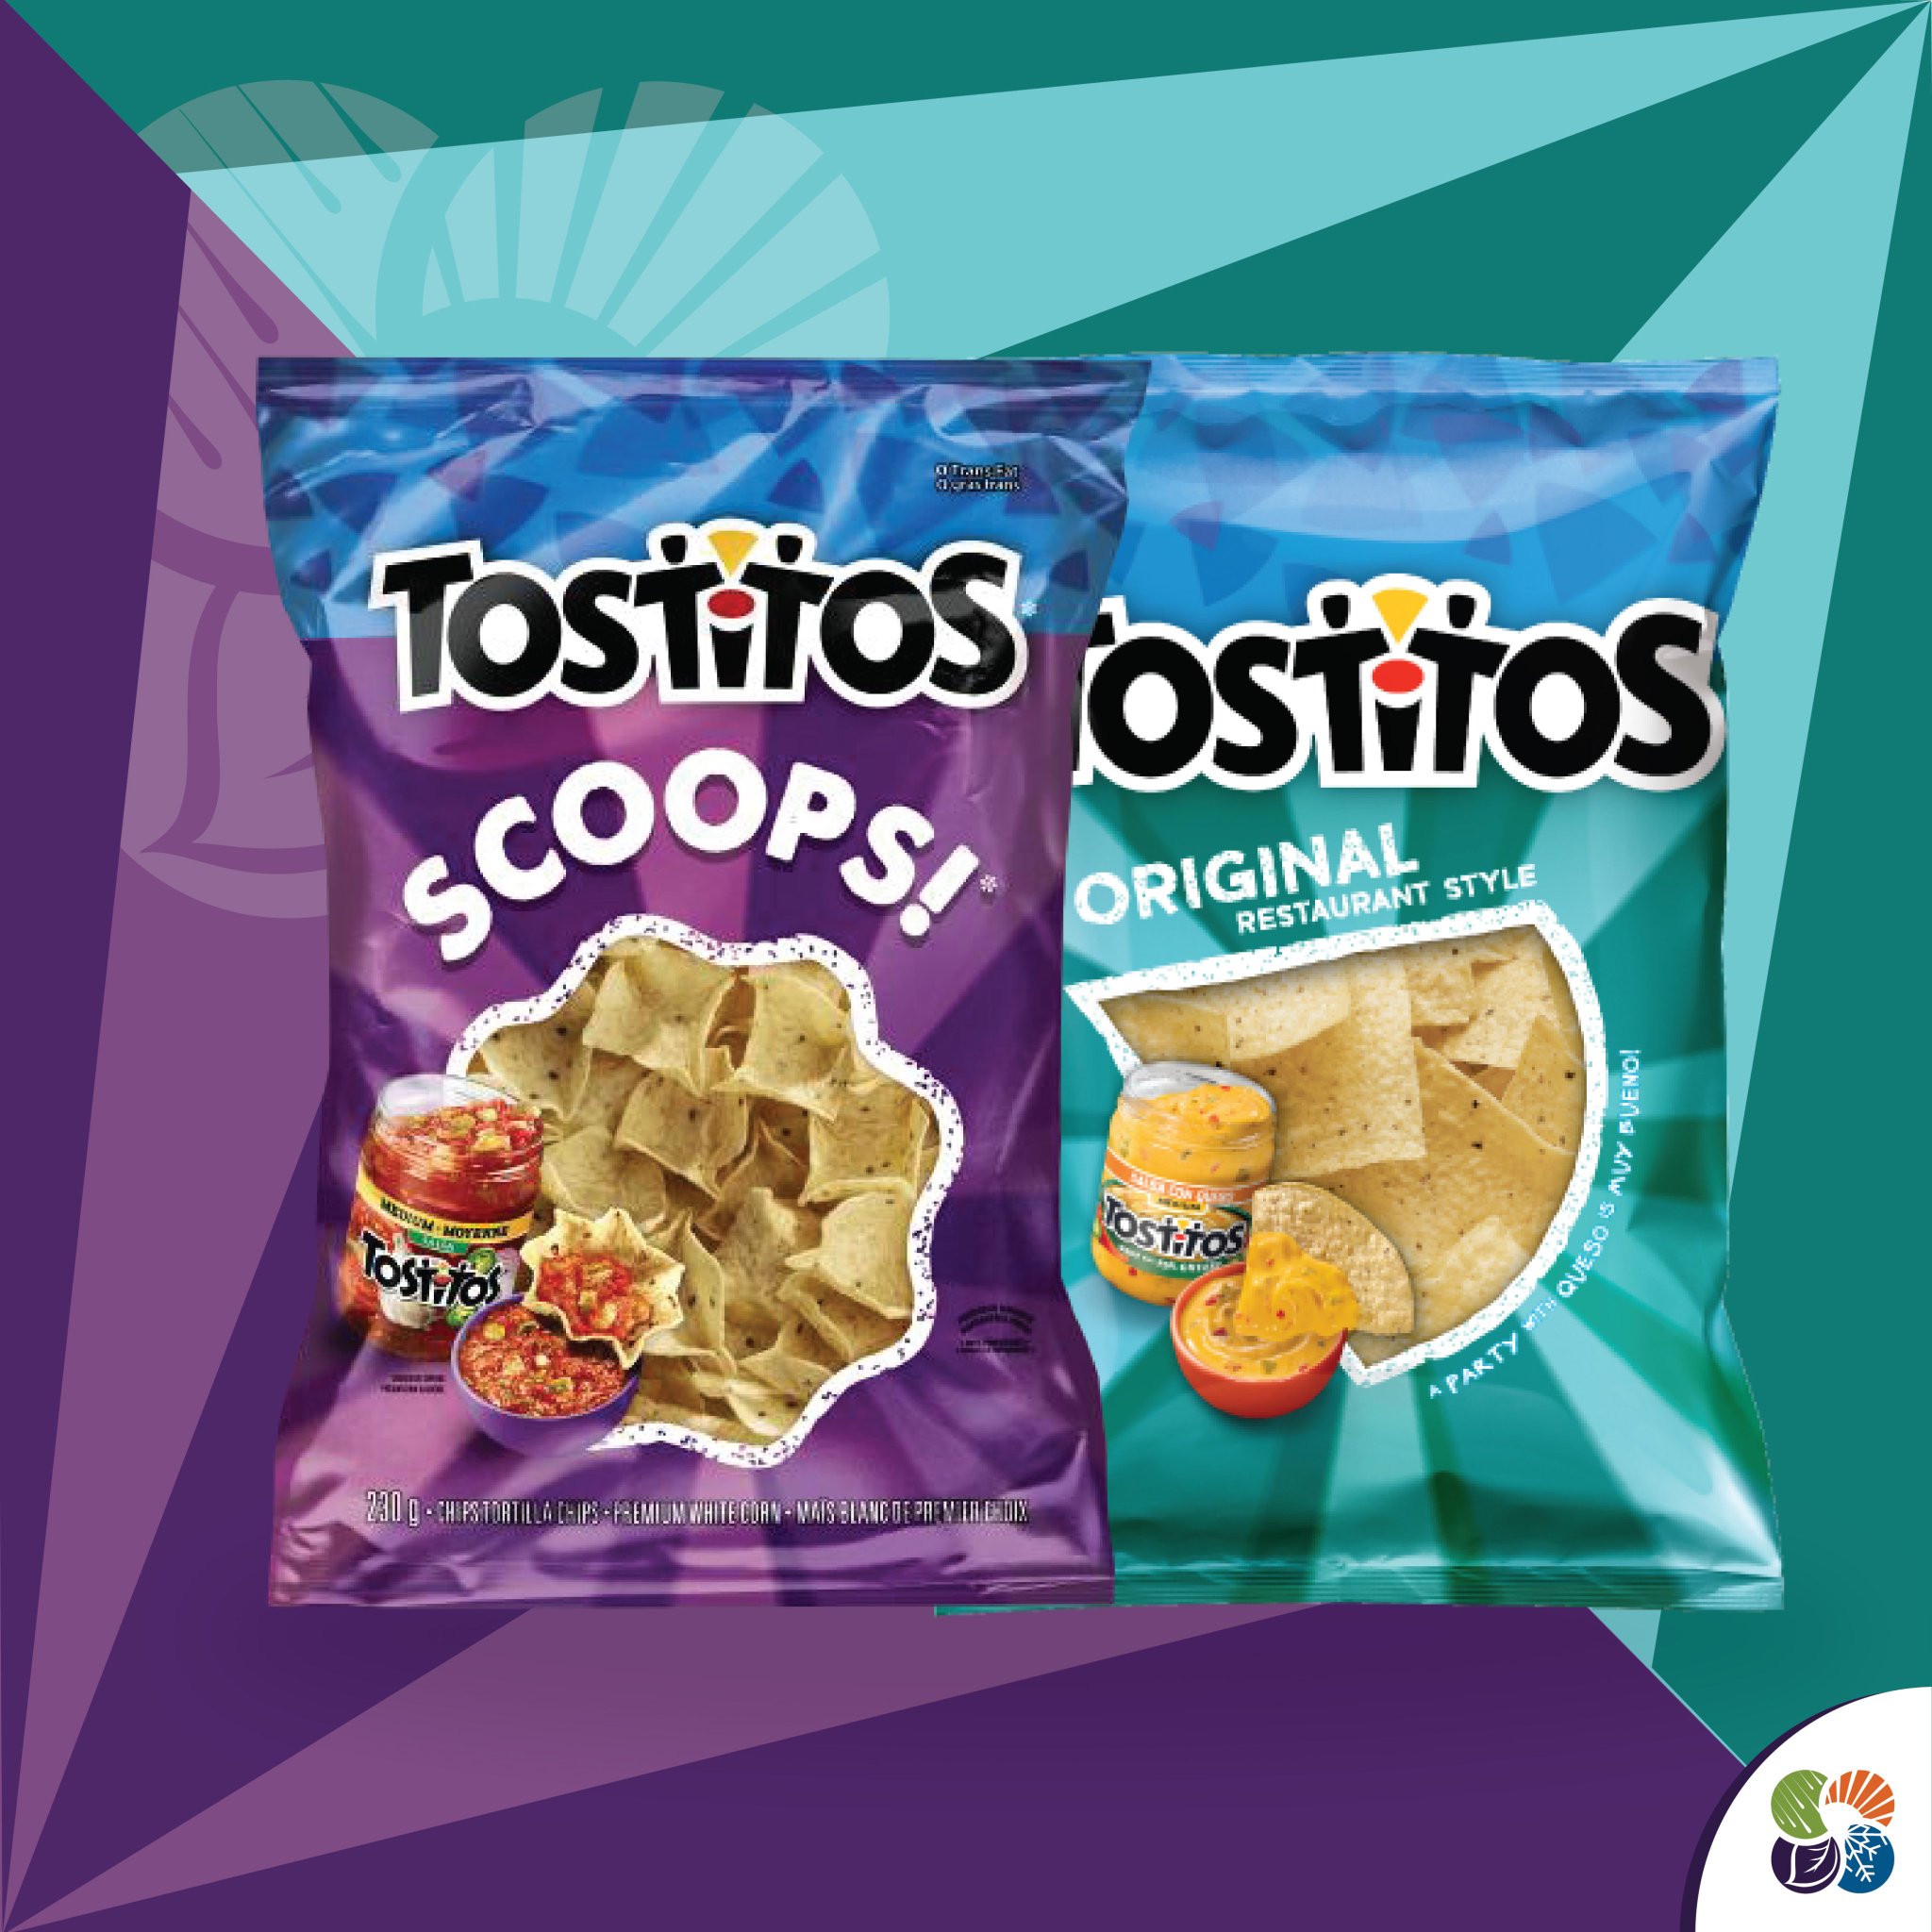 Tostitos dip expiration date format How Long Is Dip Good For After Opening